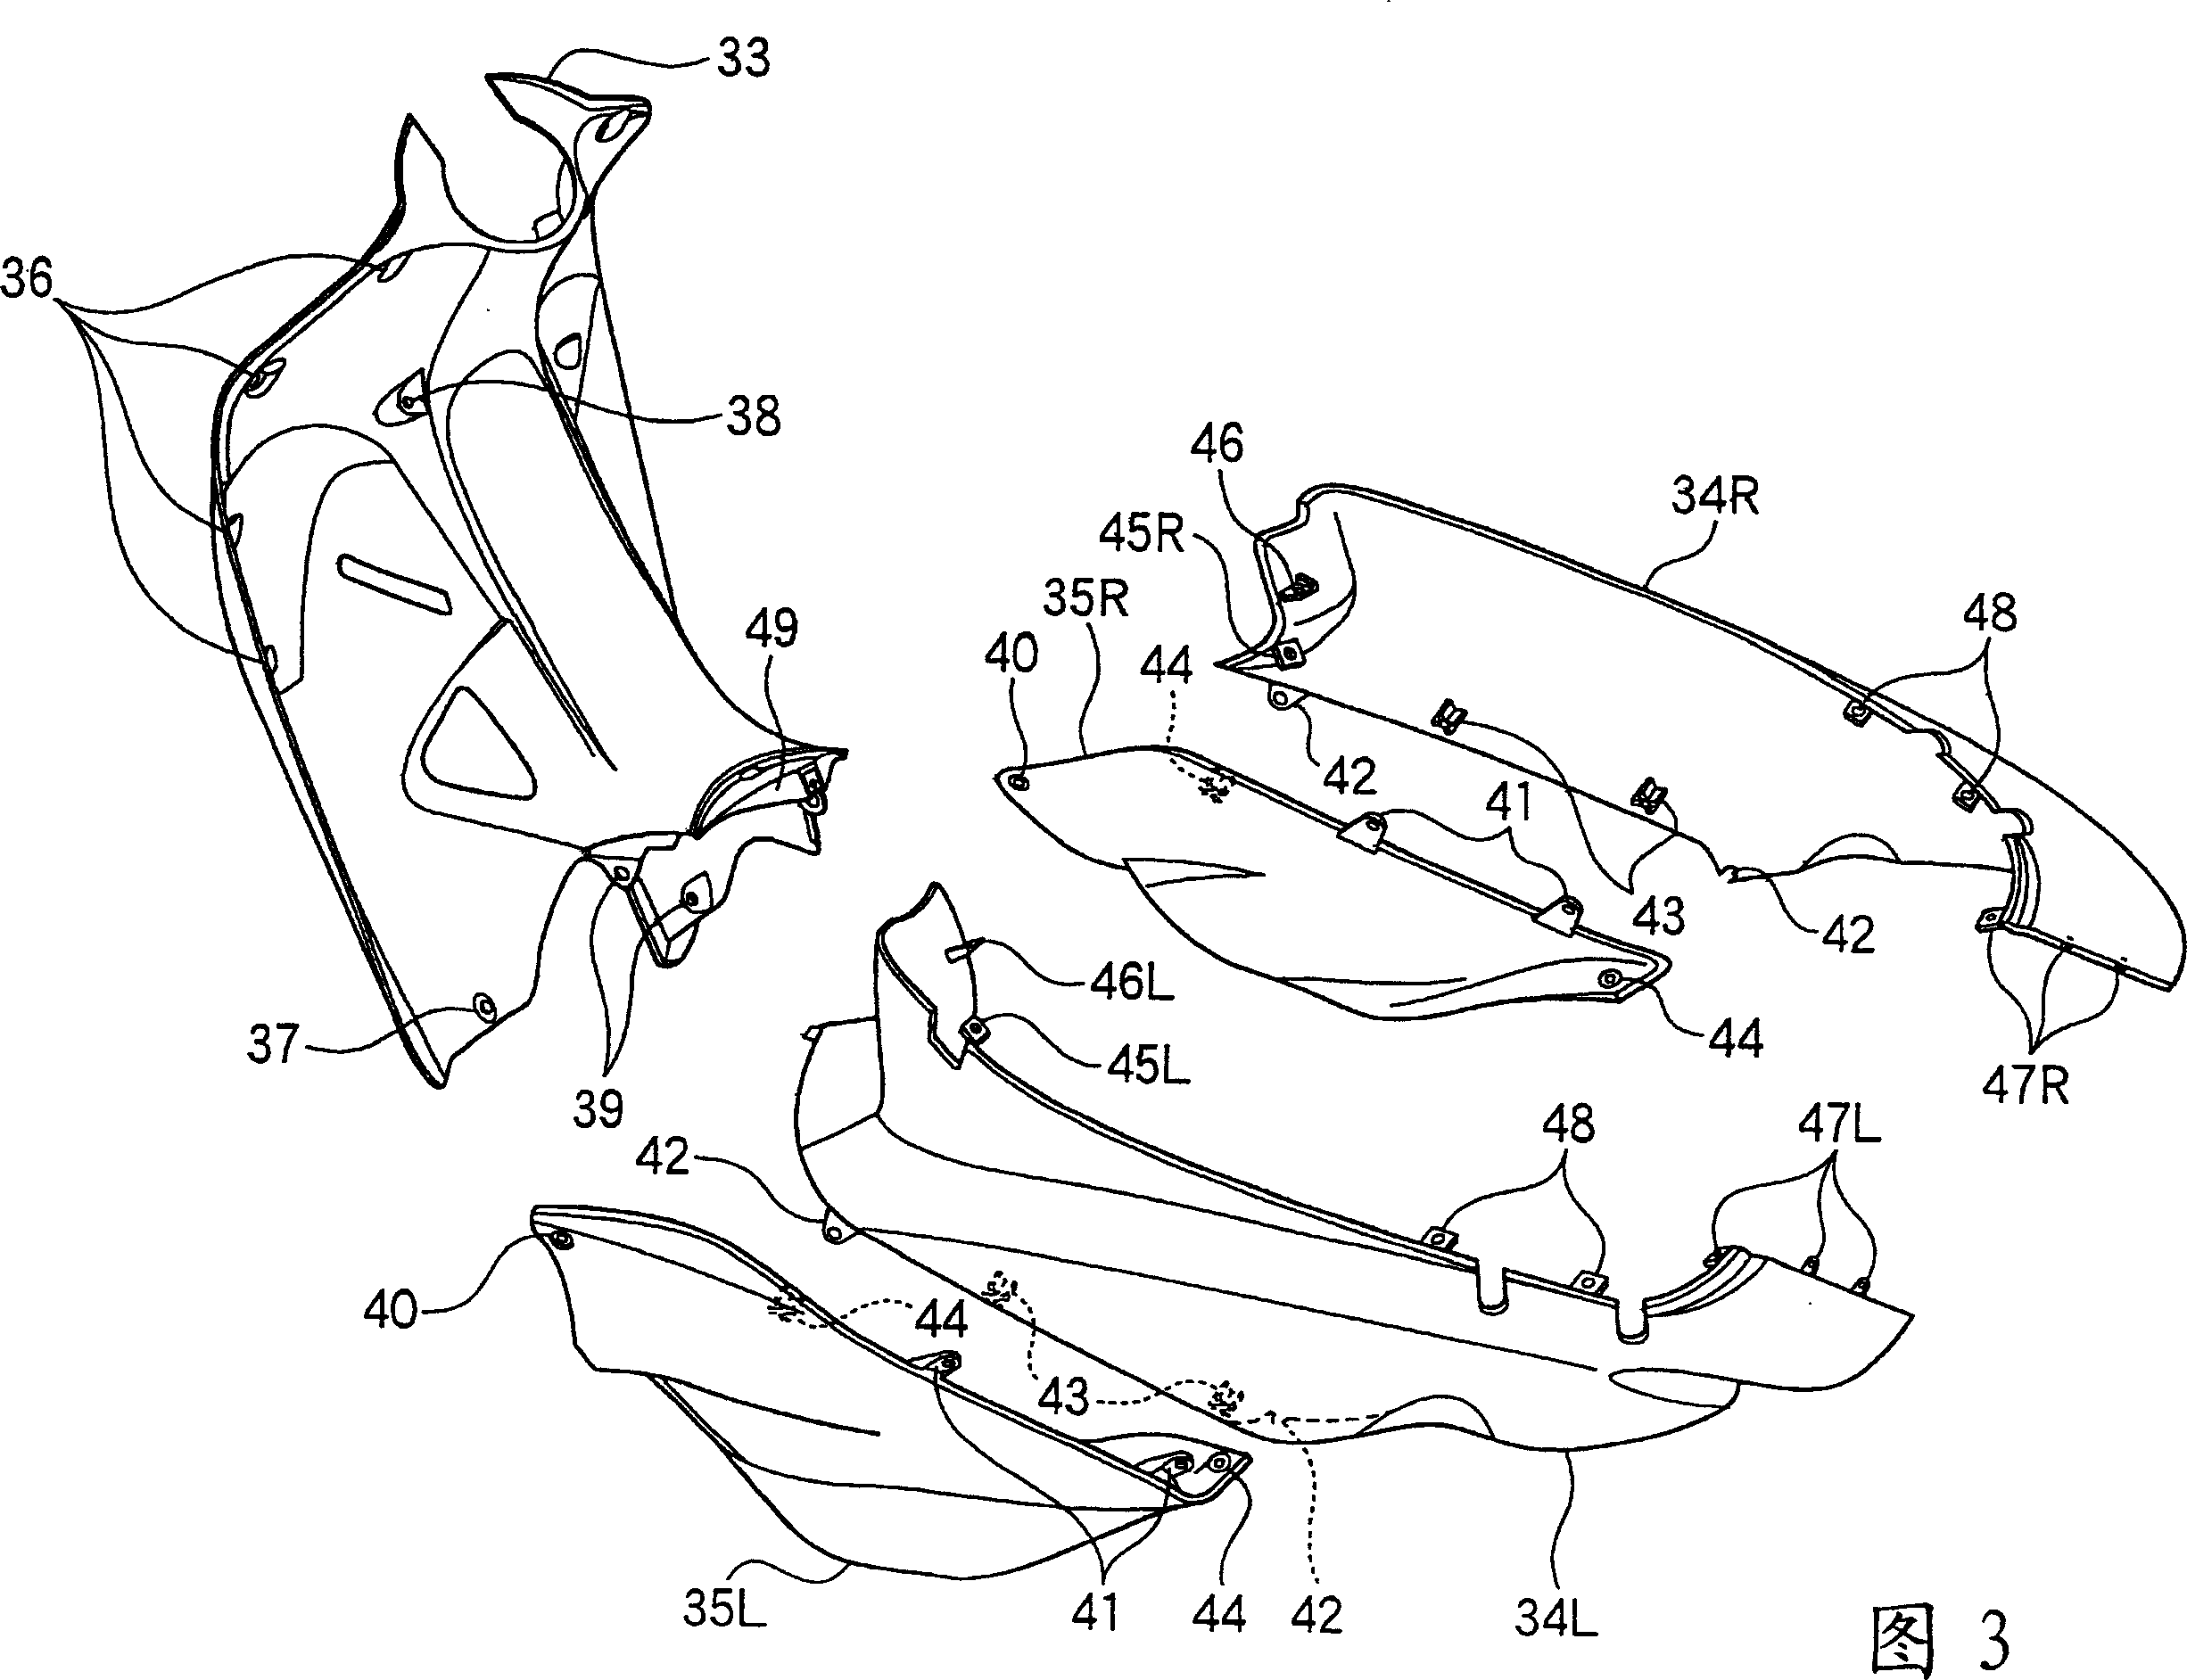 Body hood mounting structure of automatic two-wheeled bicycle